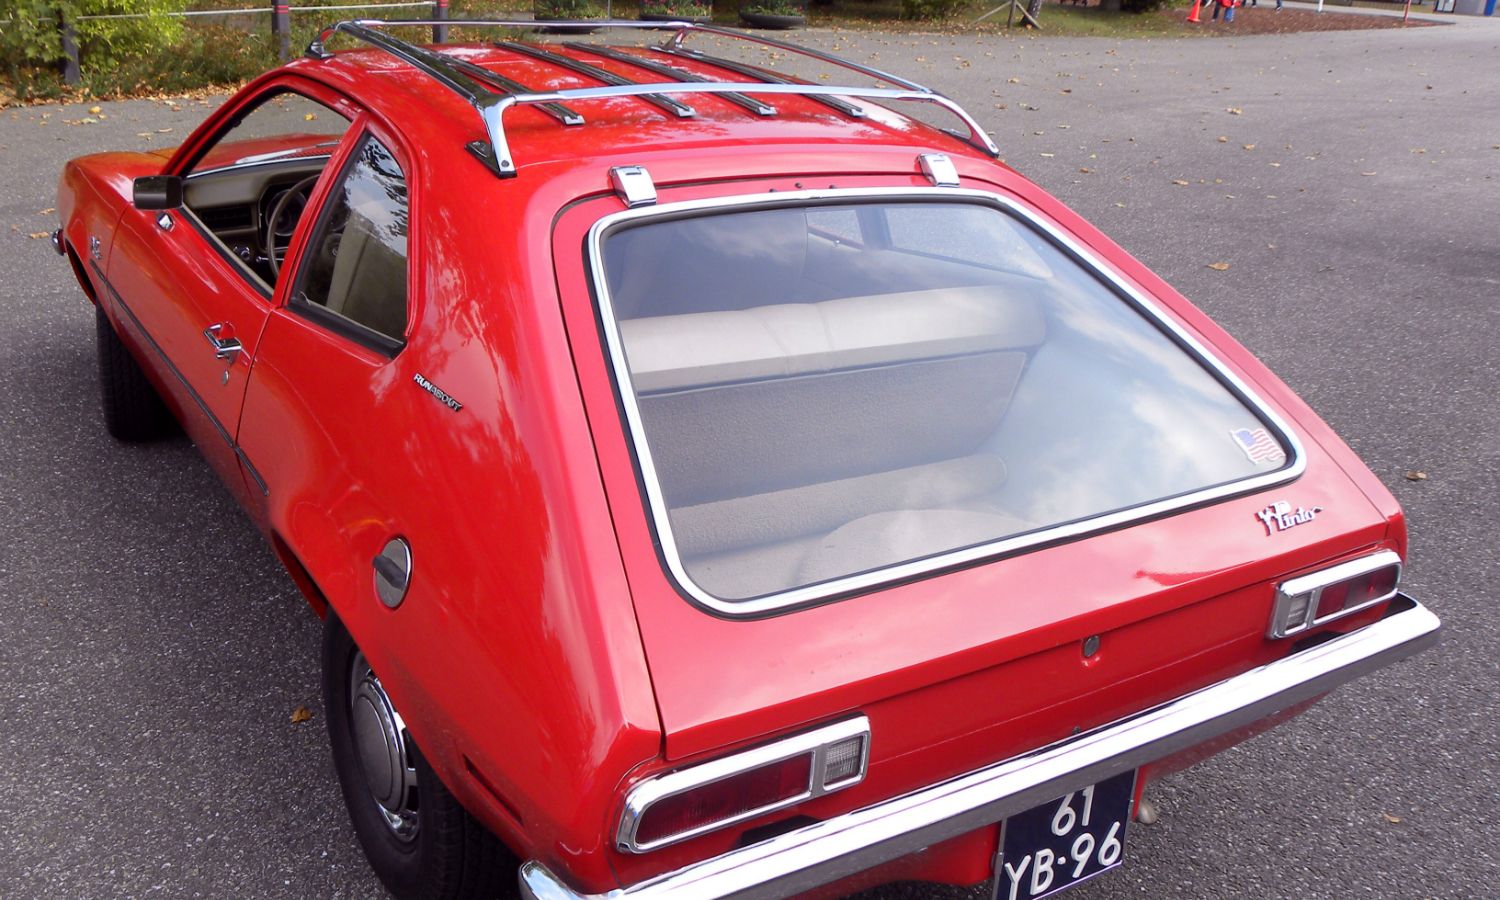 Ford pinto case lawsuits #6